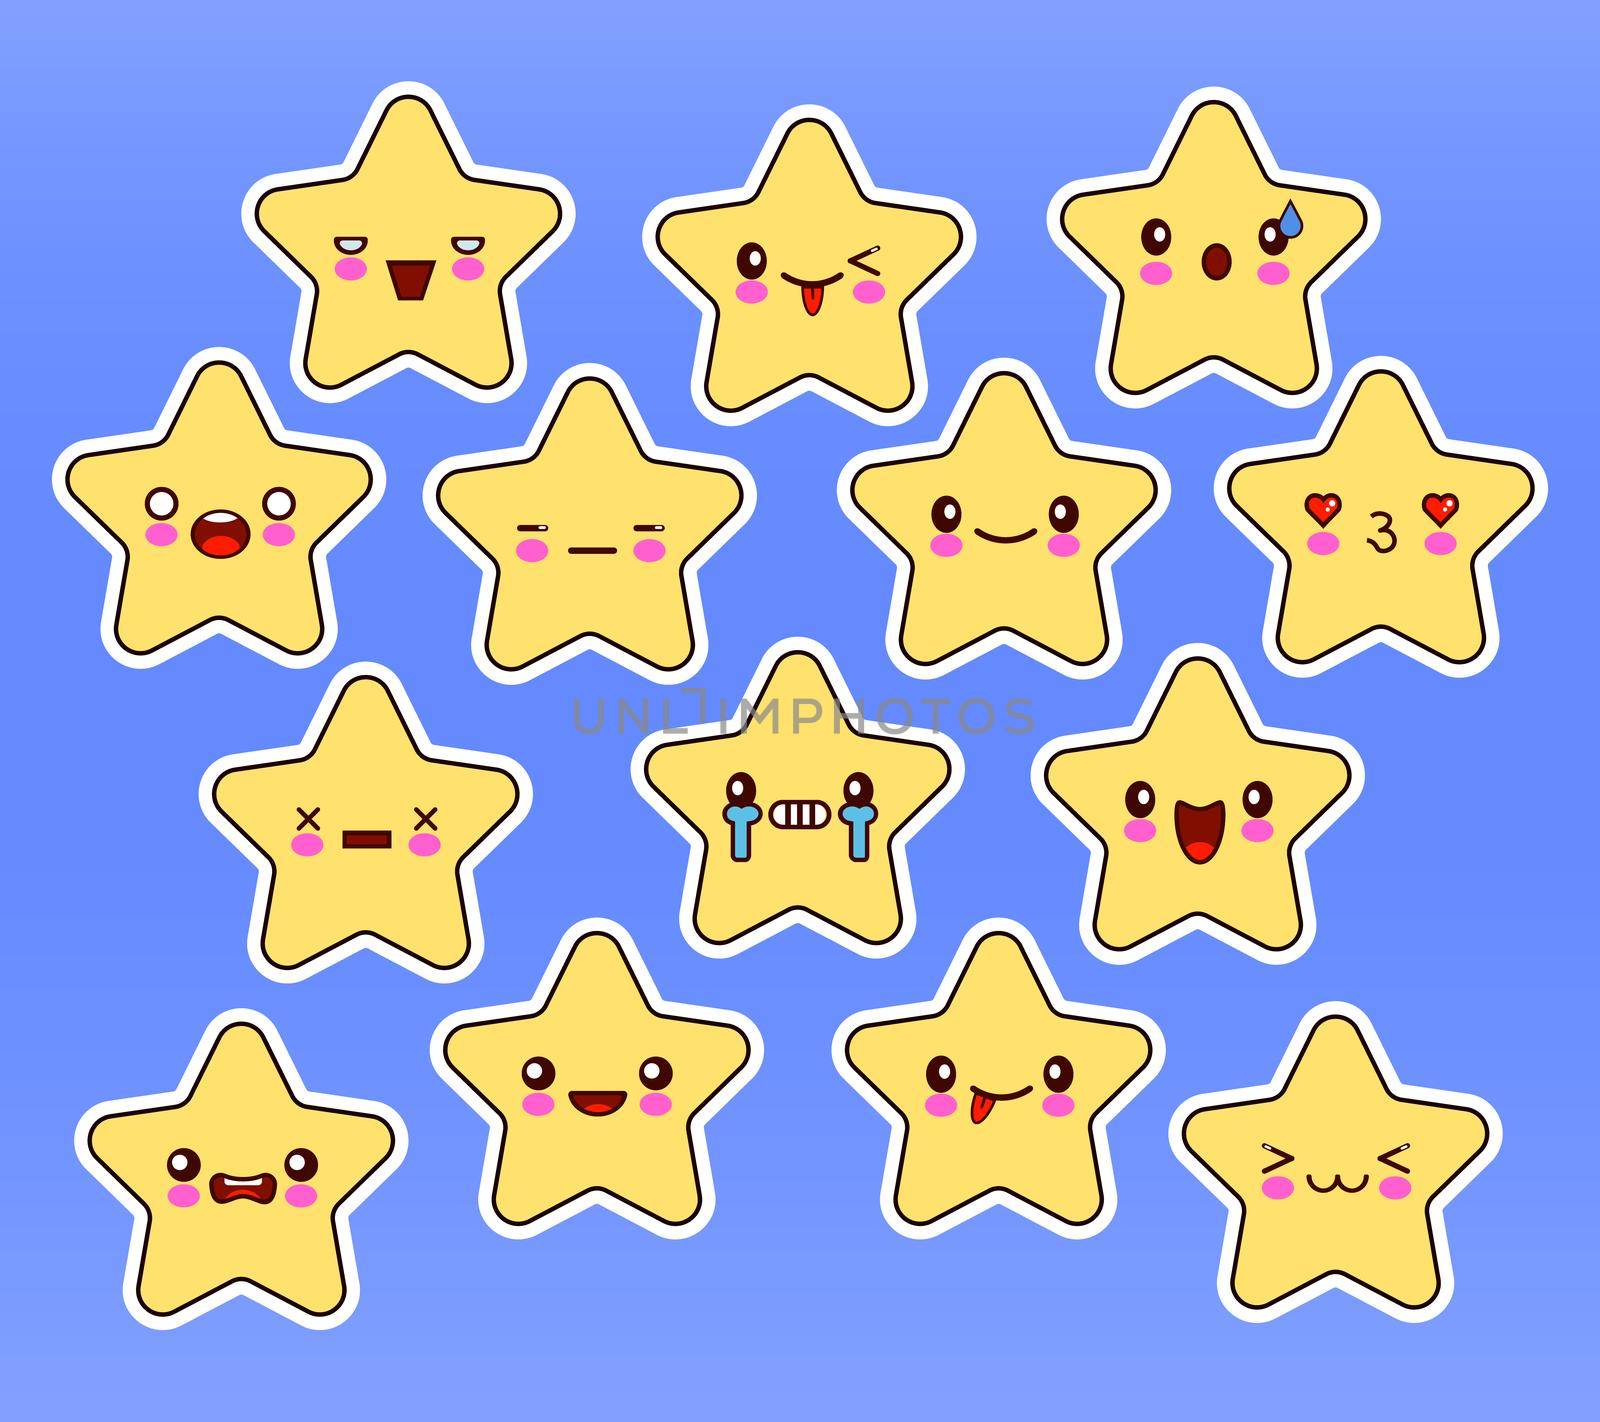 Kawaii stars set, face with eyes, yellow color on blue background. illustration